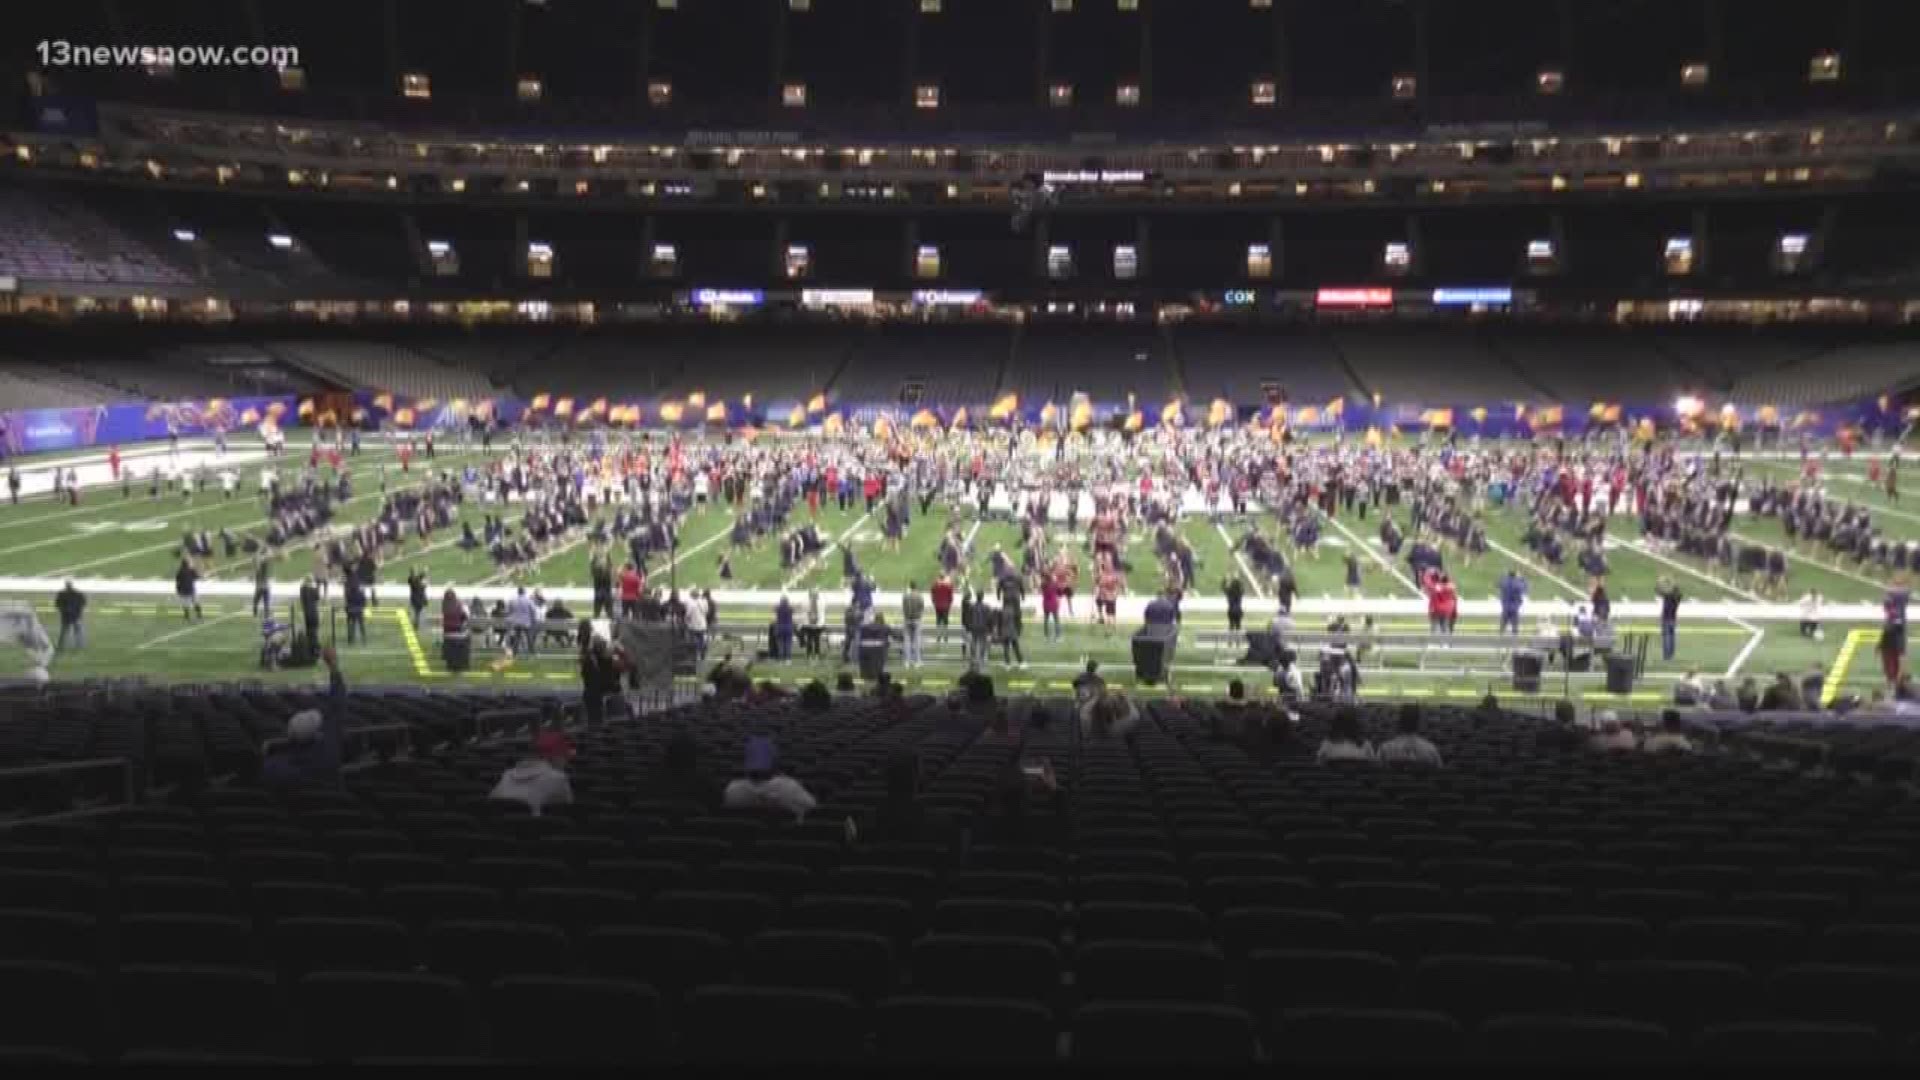 Nansemond River High School's school band traveled to New Orleans to perform at the Sugar Bowl.